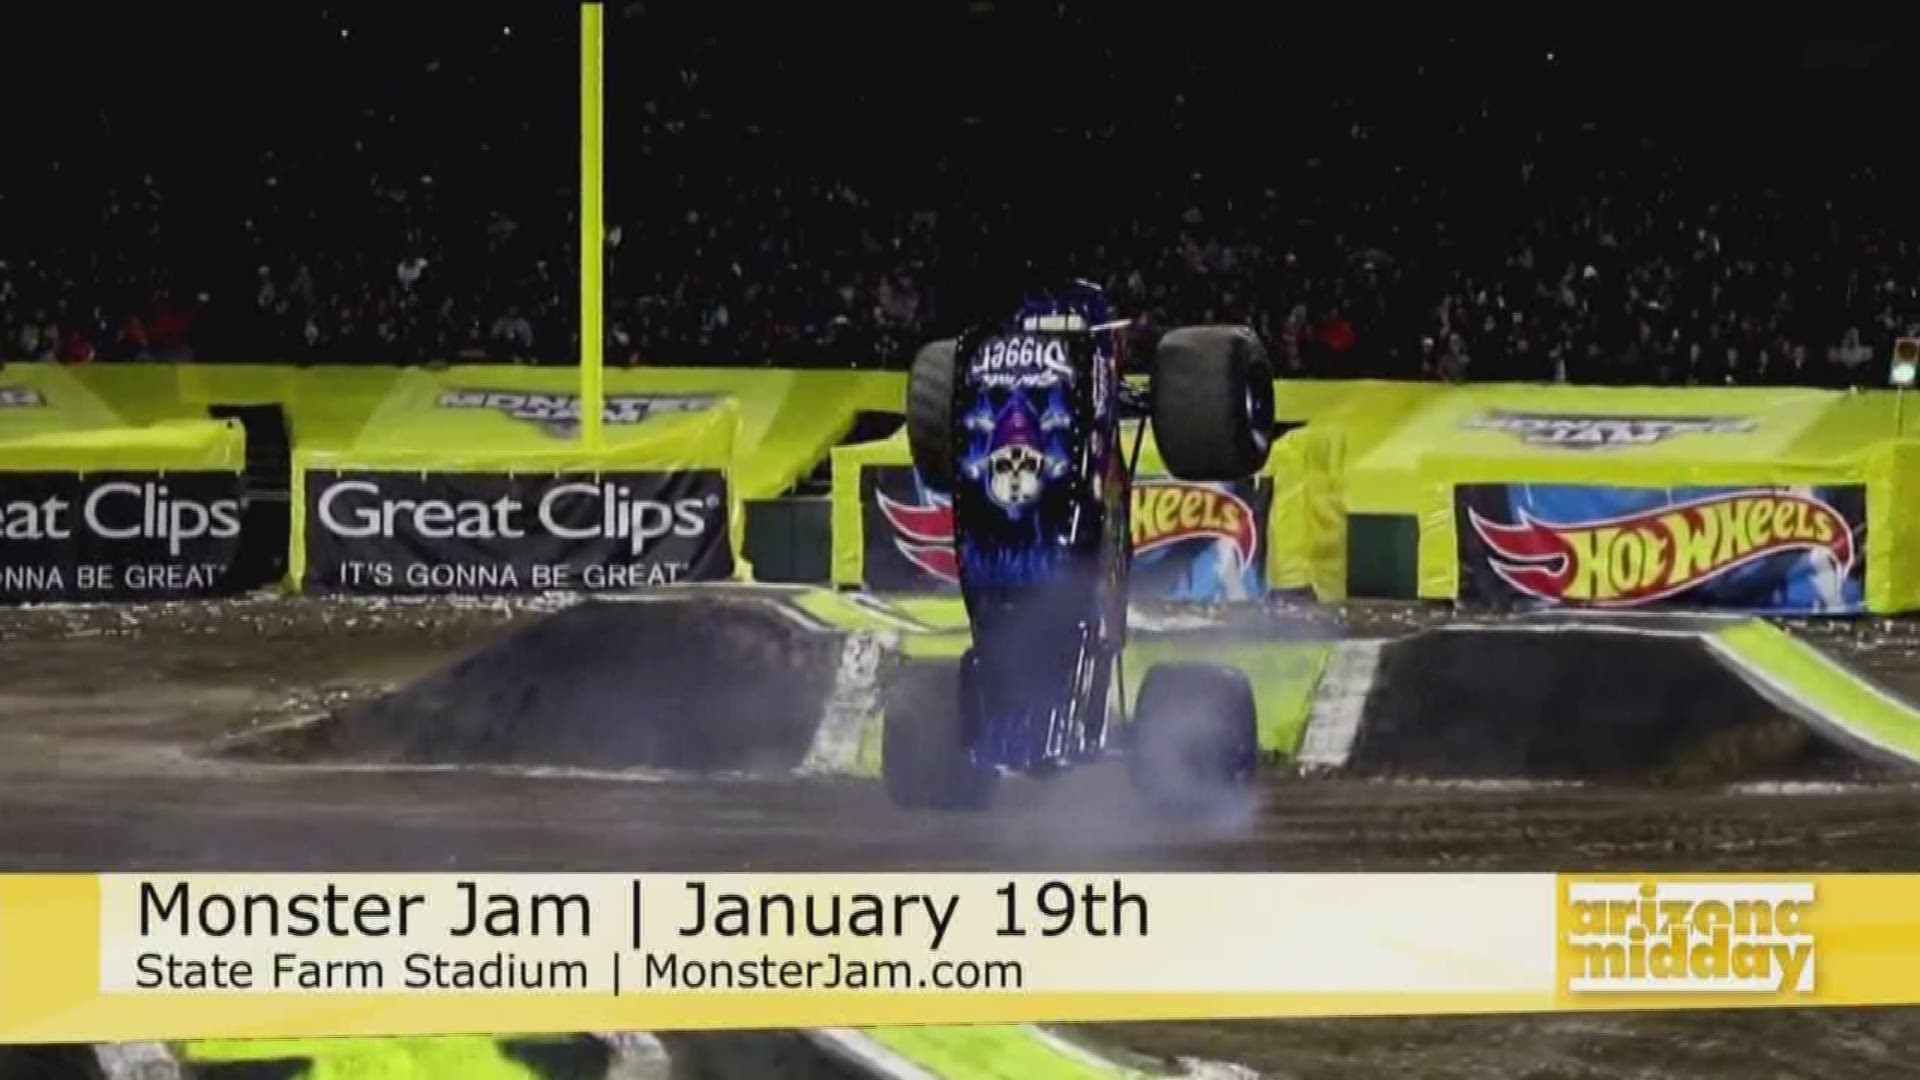 Monster Jam Driver Jon Zimmer gives us the scoop on this year's Phoenix Monster Jam and how you can enroll in Monster Jam University!